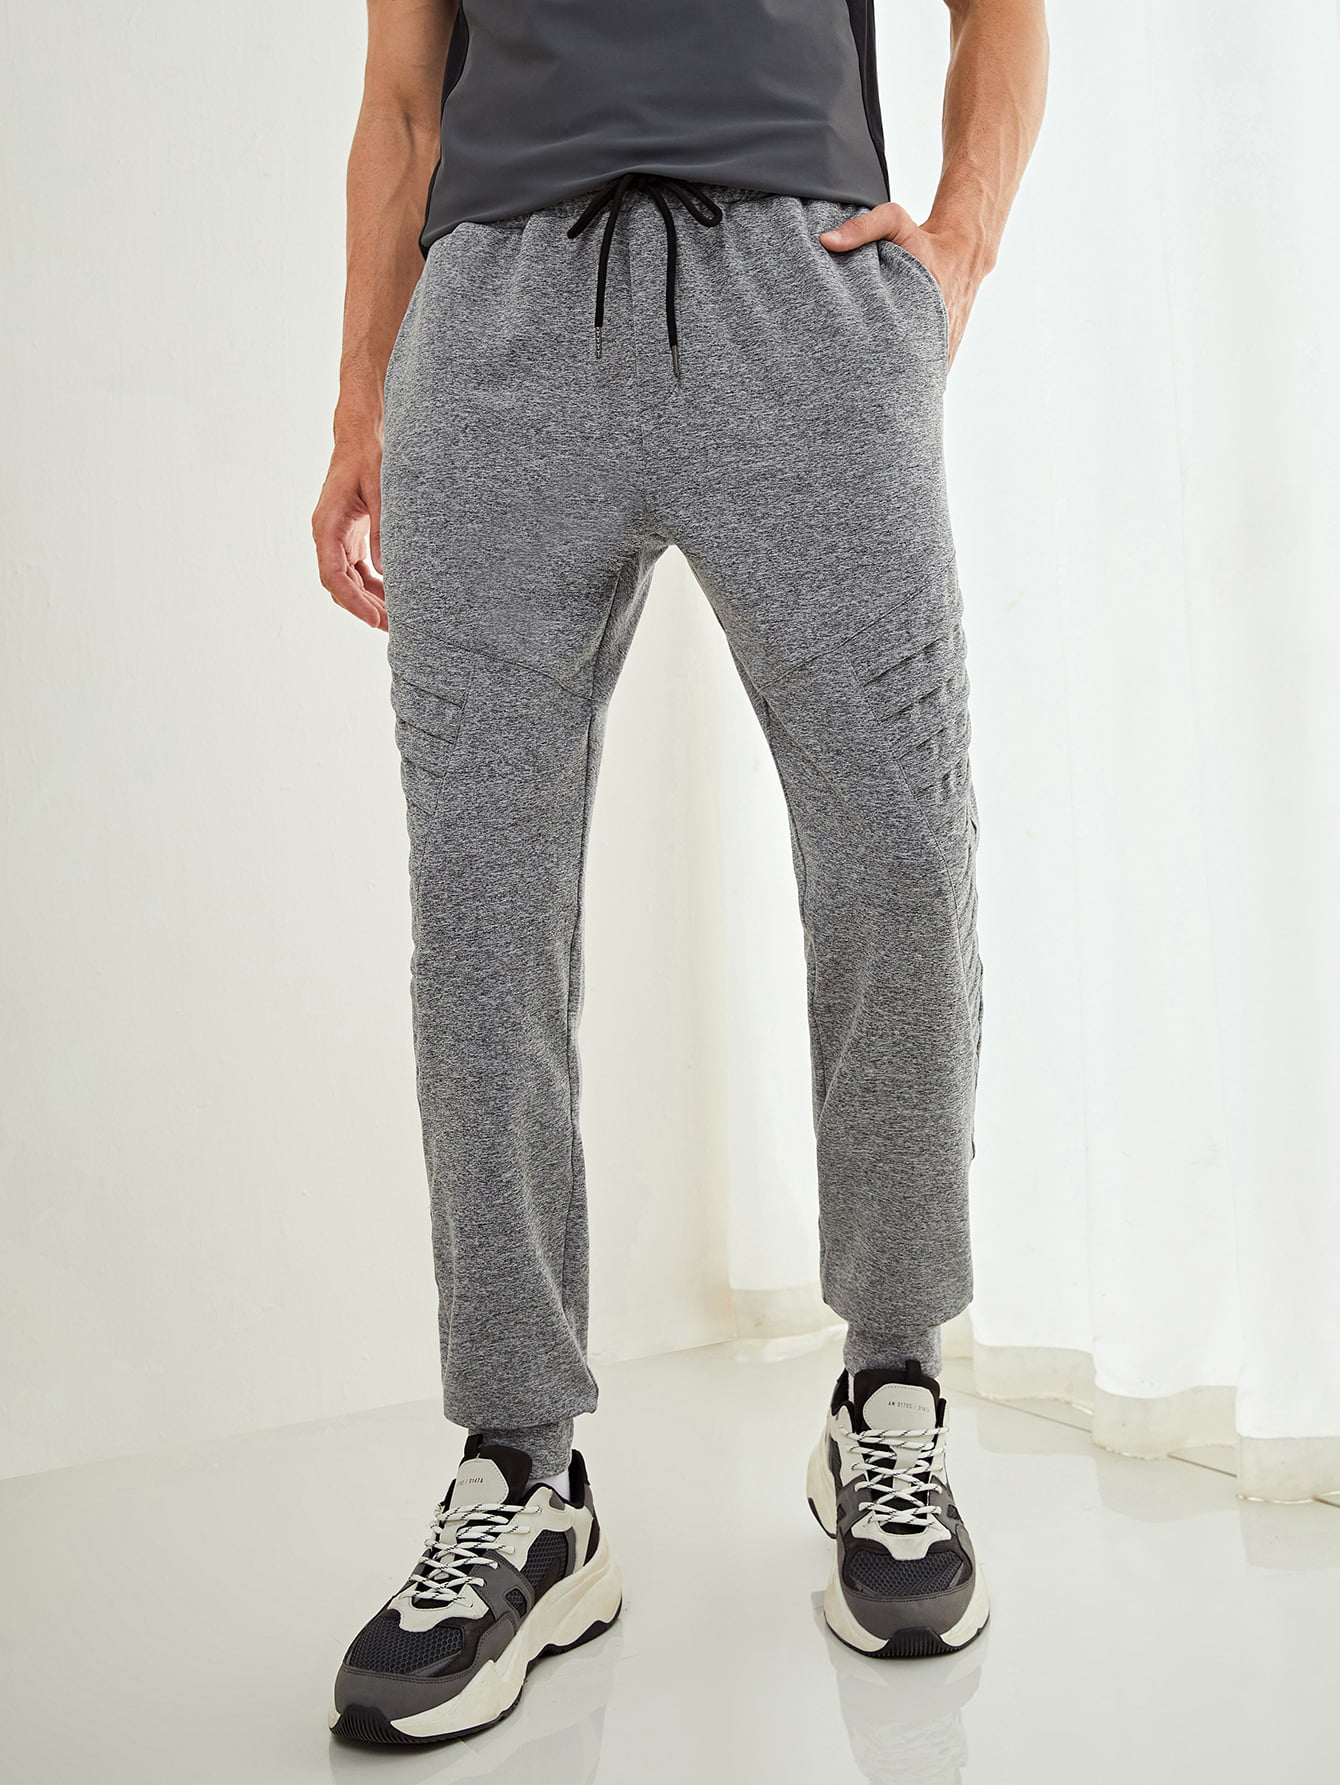 Marled Fleece Sweatpants with Draw String and Pockets for Men